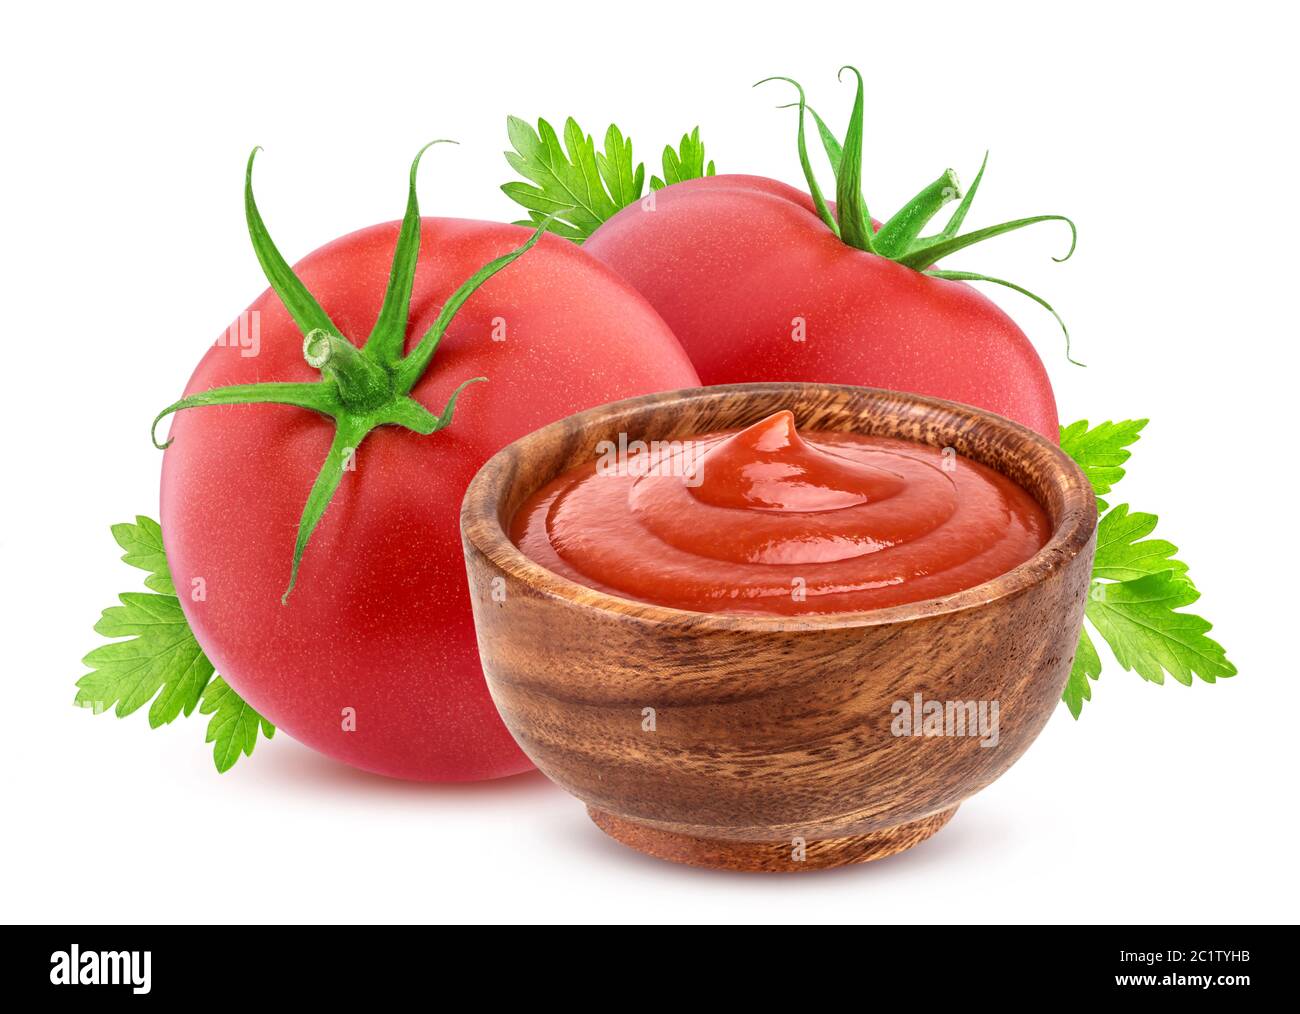 Tomato Ketchup in a Small Transparent Glass Round Bowl Isolated on White  Background Stock Photo - Image of cutout, food: 178117294